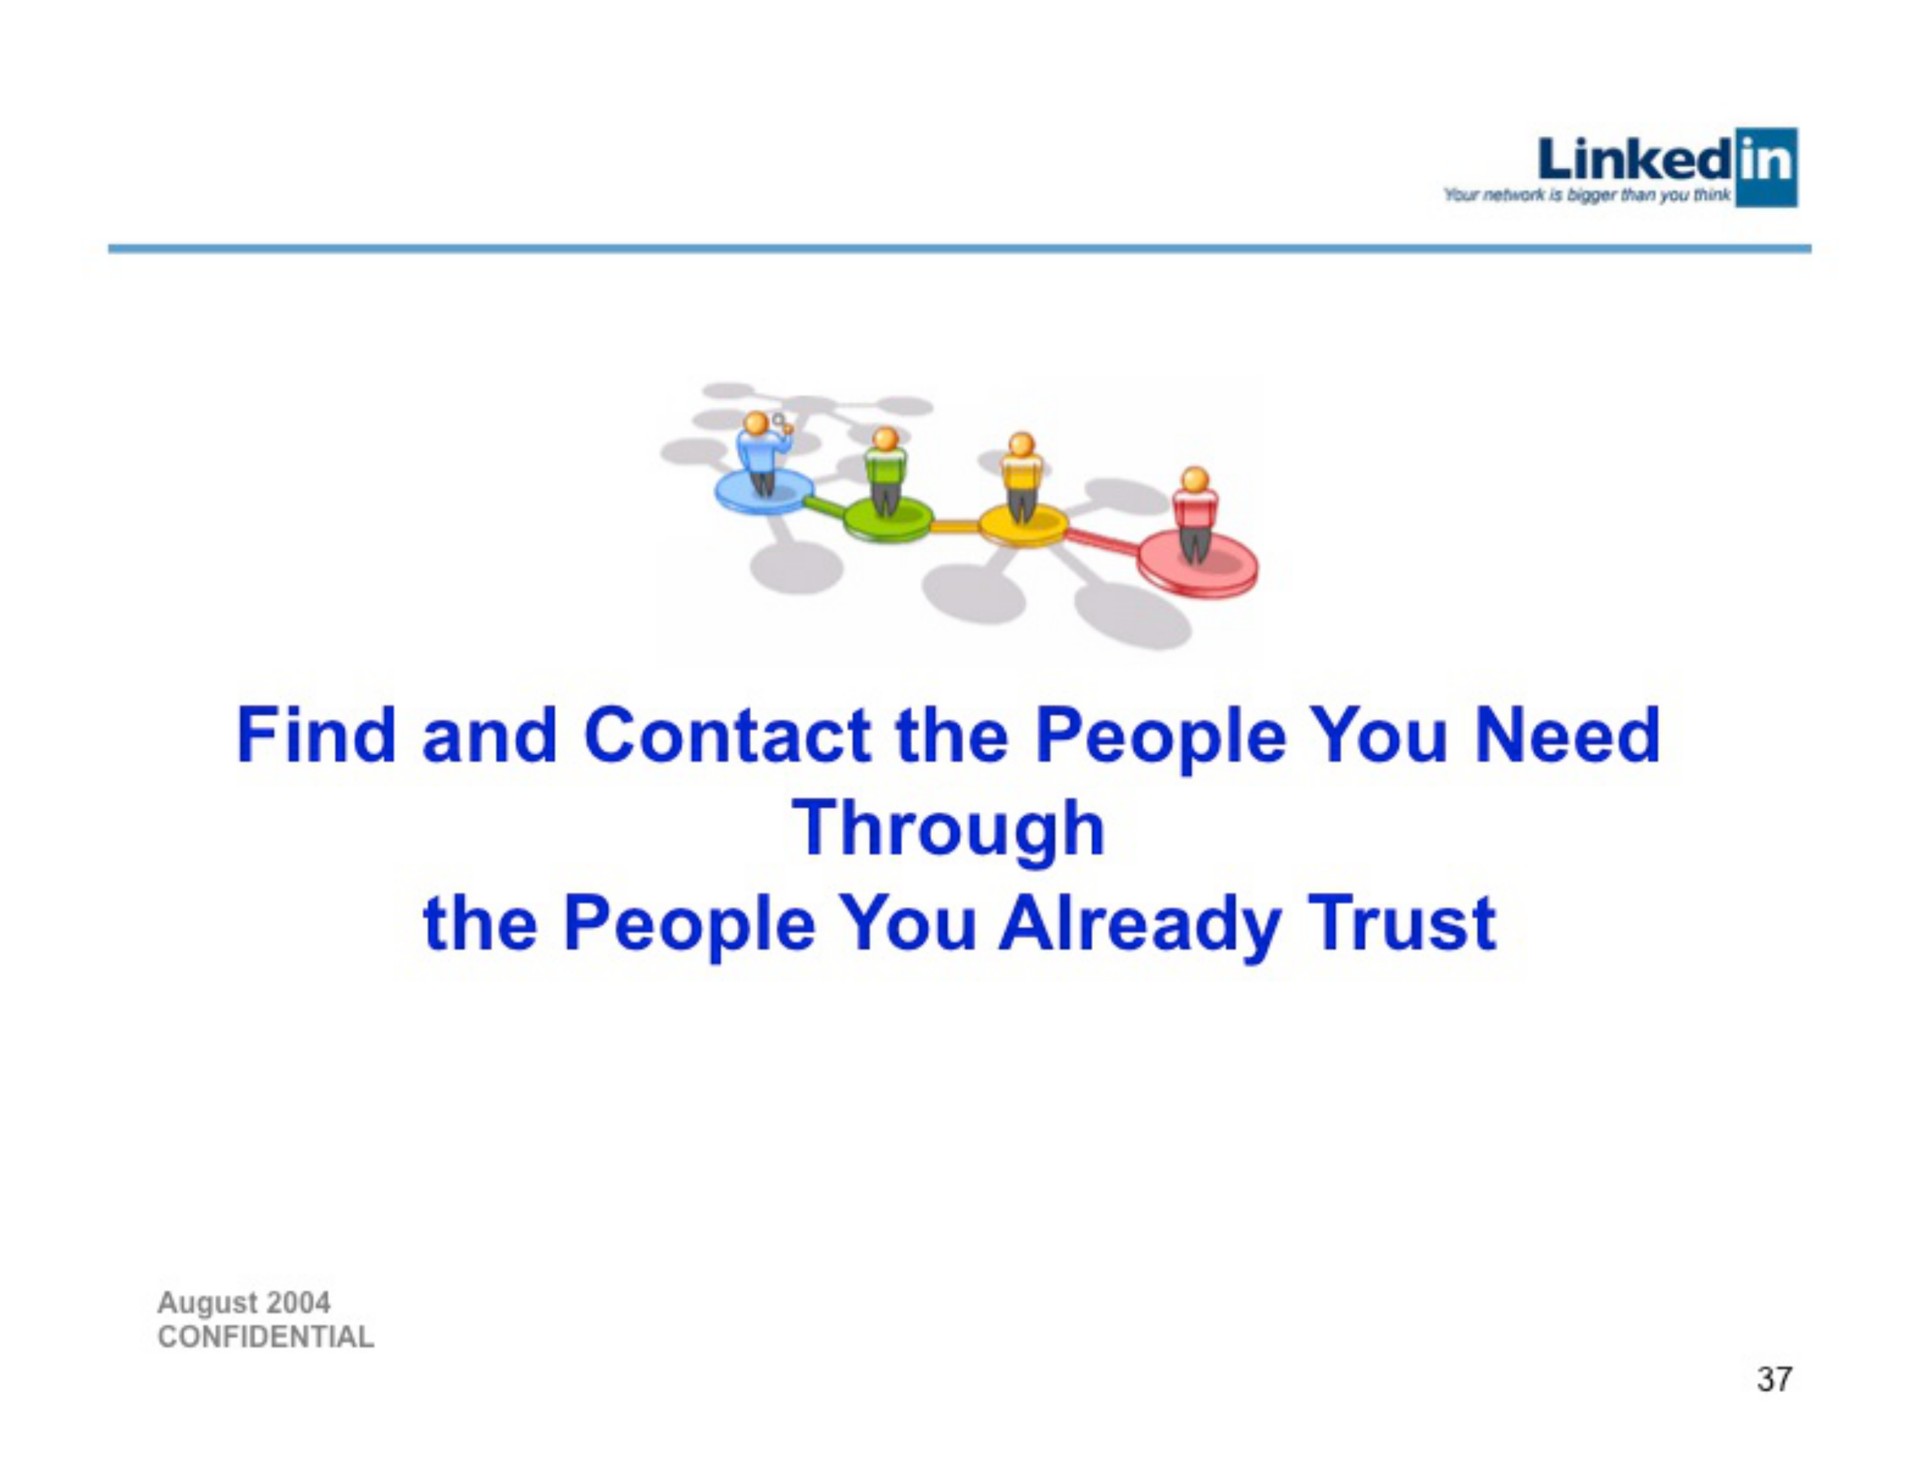 linked find and contact the people you need through the people you already trust | Linkedin